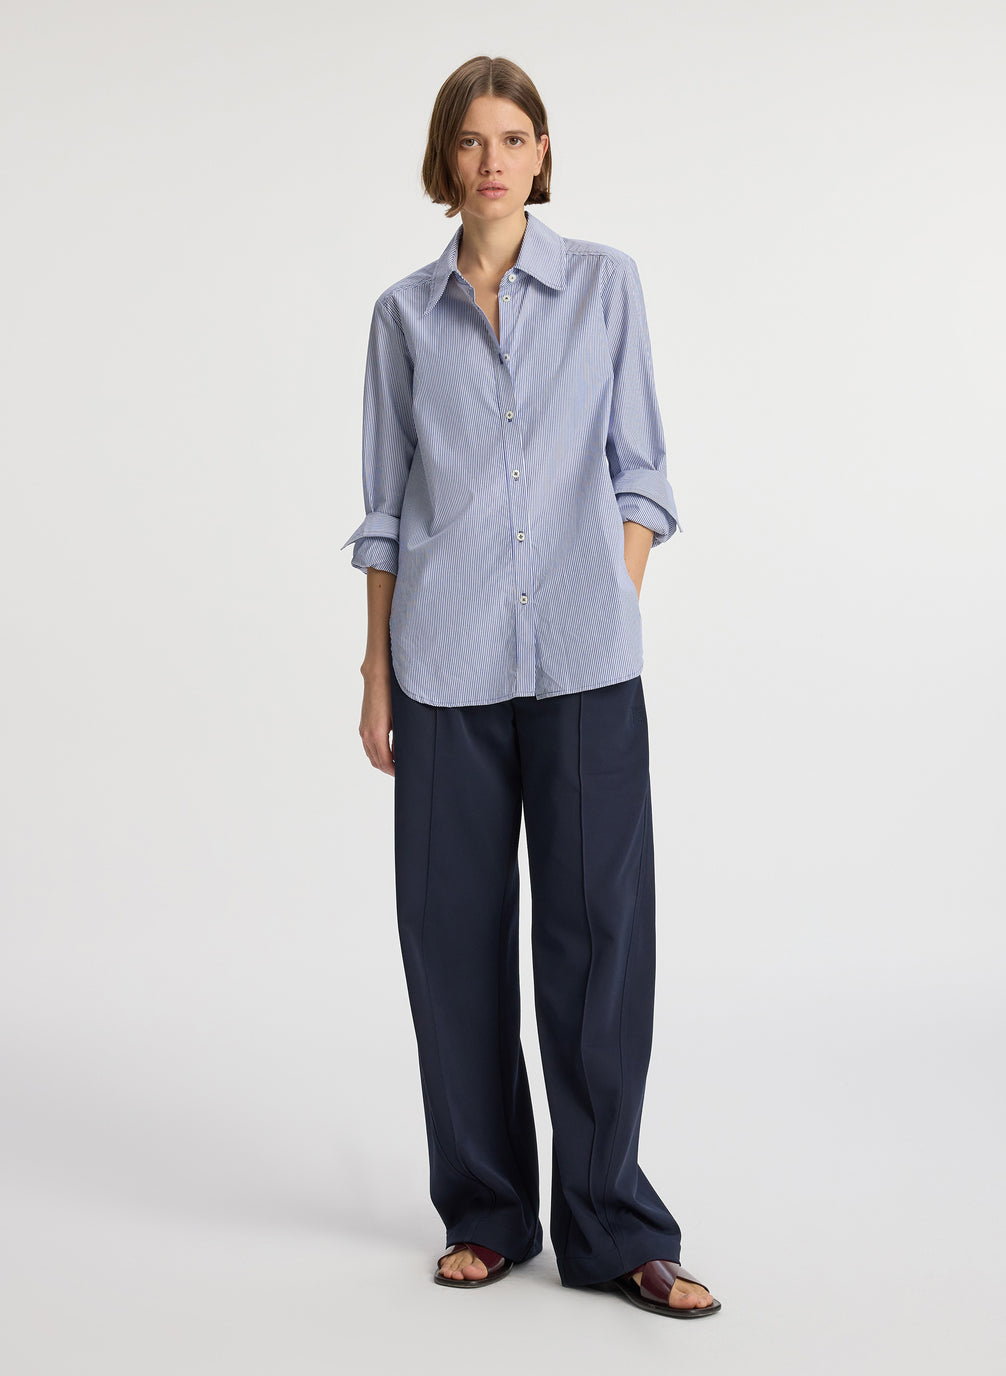 front view of woman wearing blue striped button down collared shirt and navy blue pants